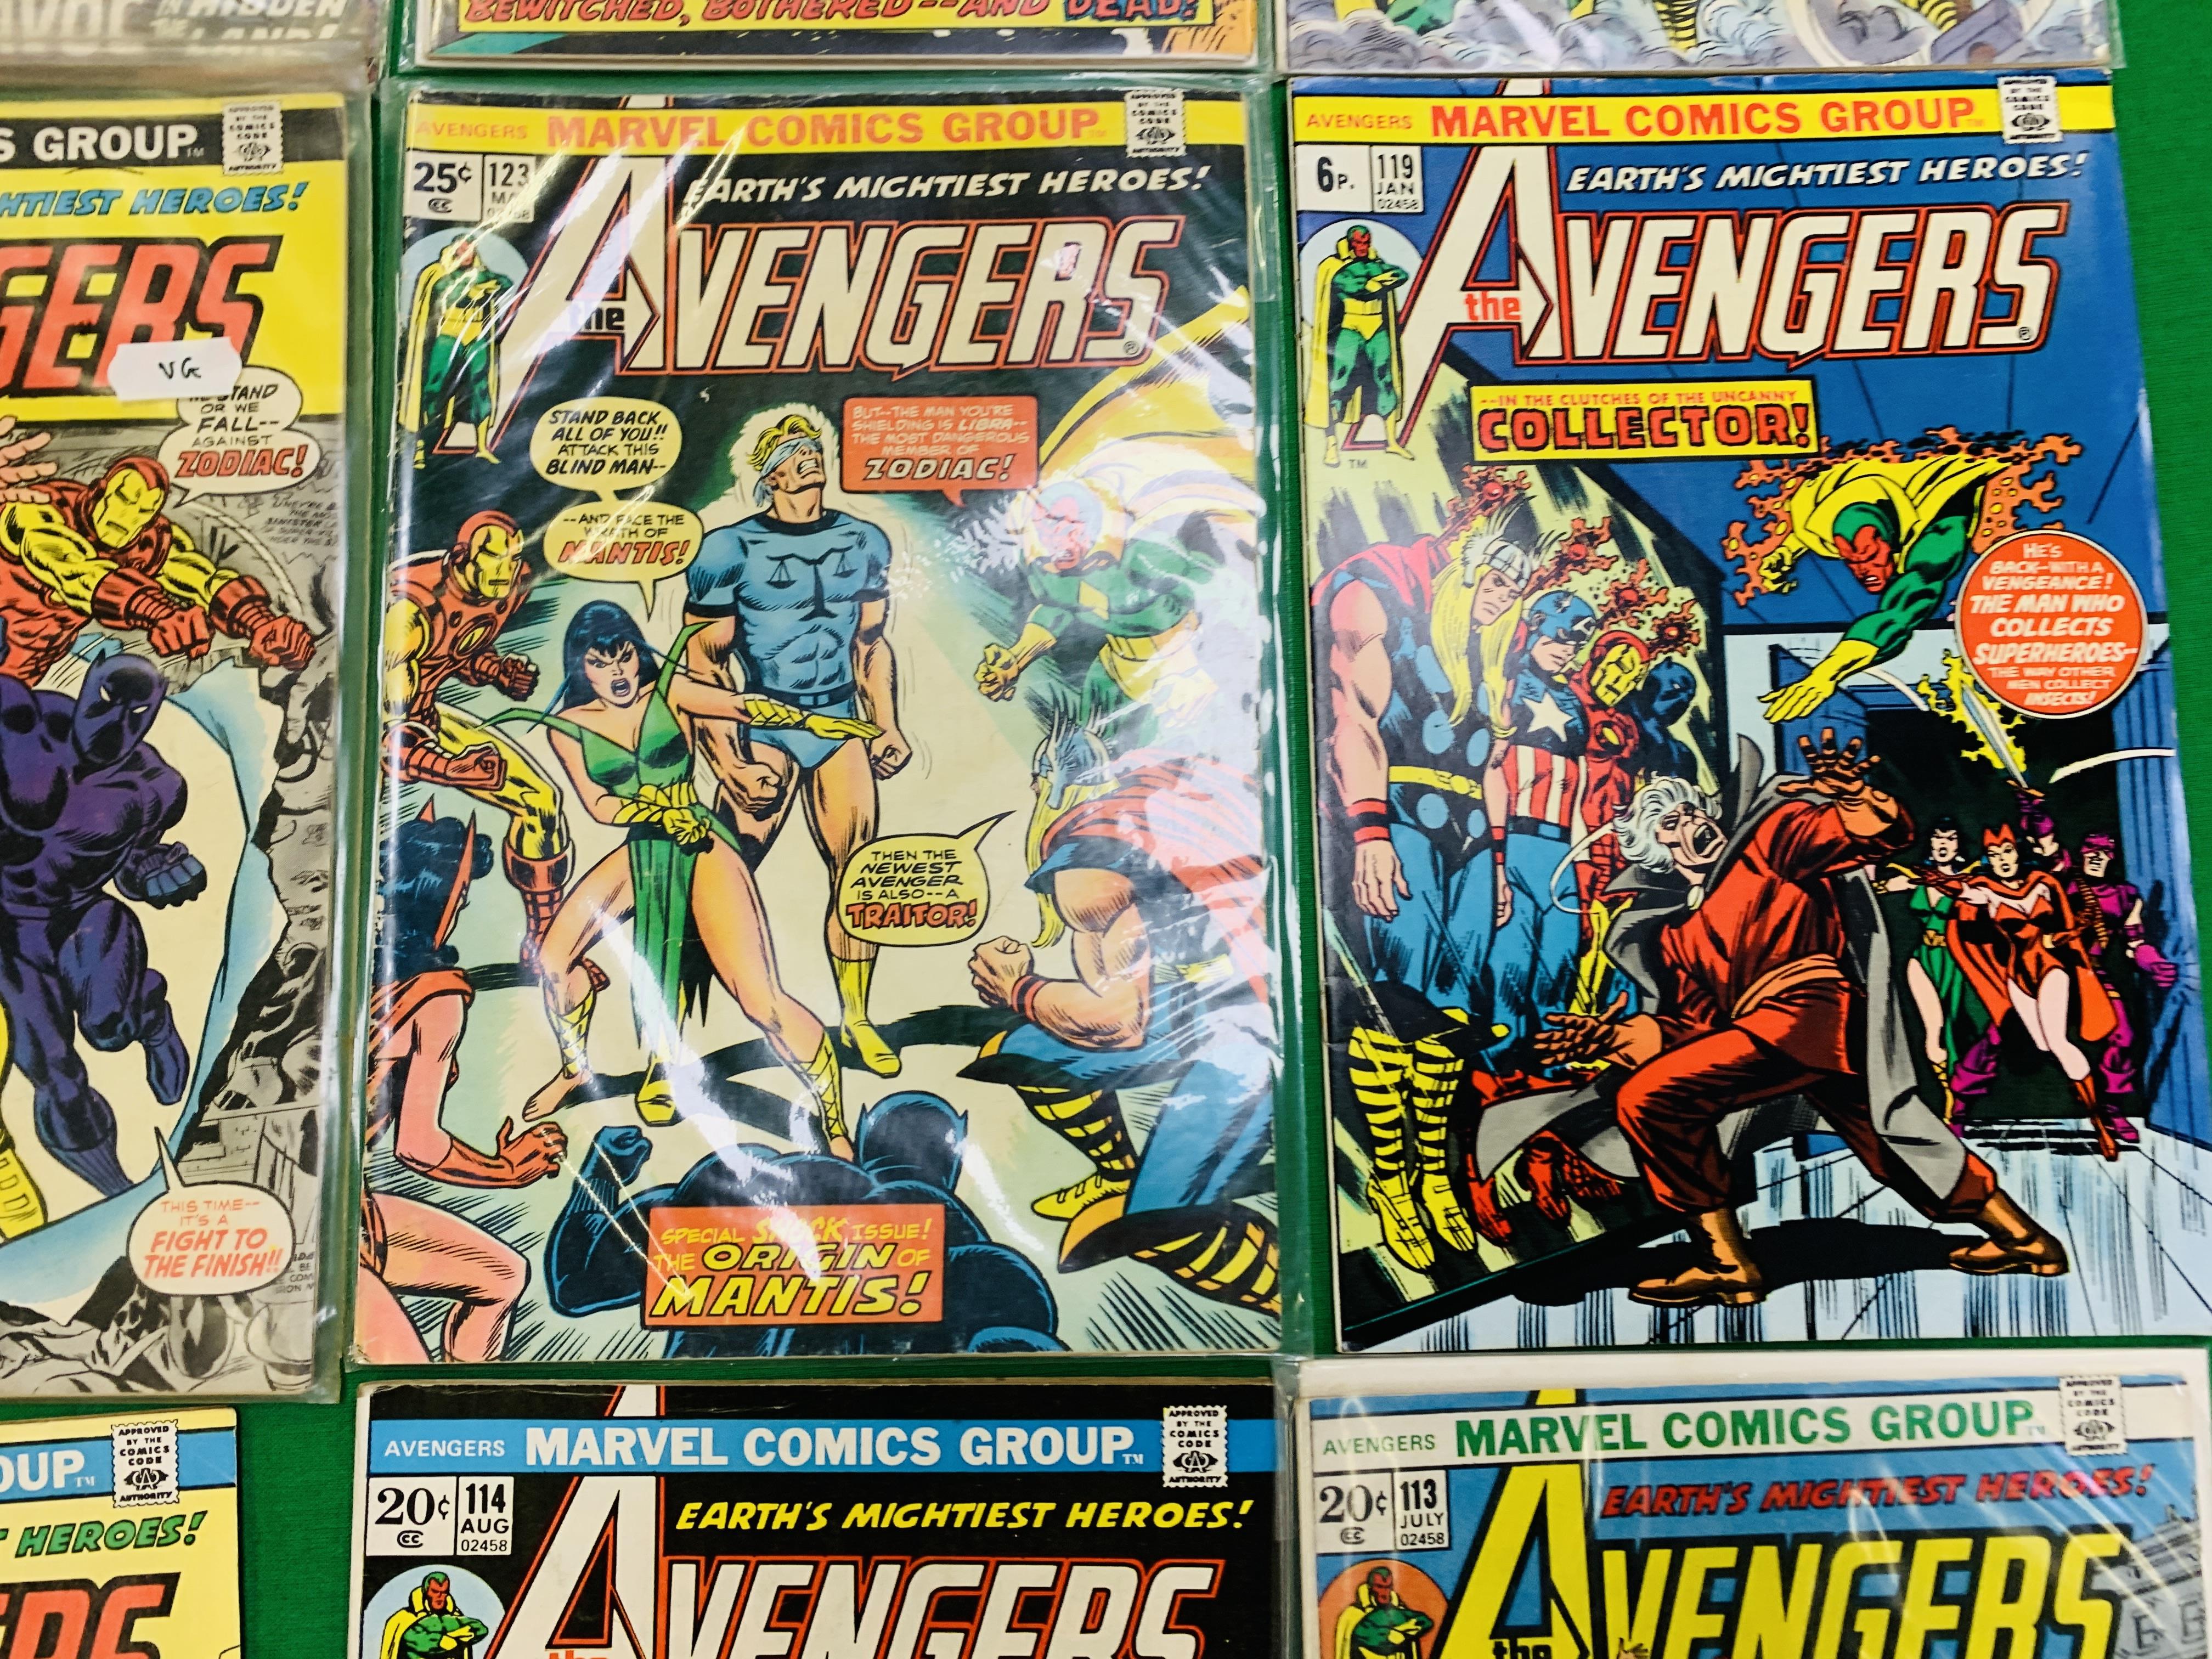 MARVEL COMICS THE AVENGERS NO. 101 - 299, MISSING ISSUES 103 AND 110. - Image 12 of 130